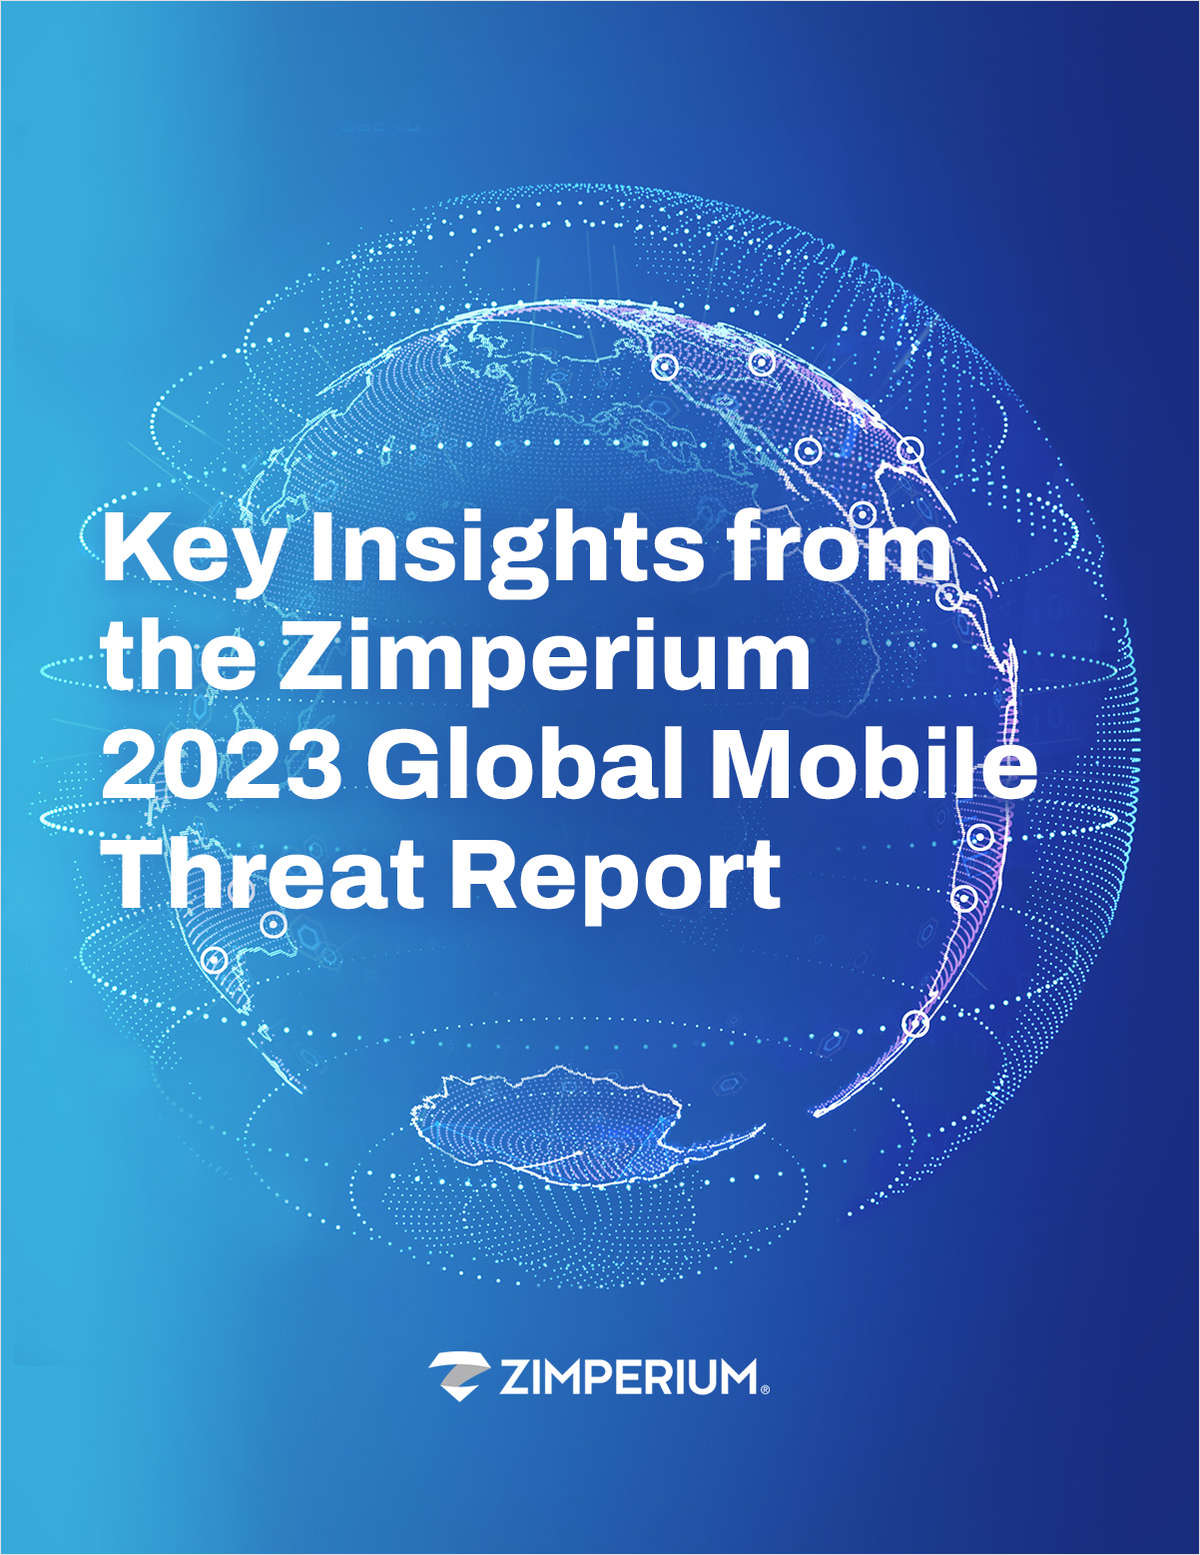 Key Insights from Zimperium's 2023 Global Mobile Threat Report